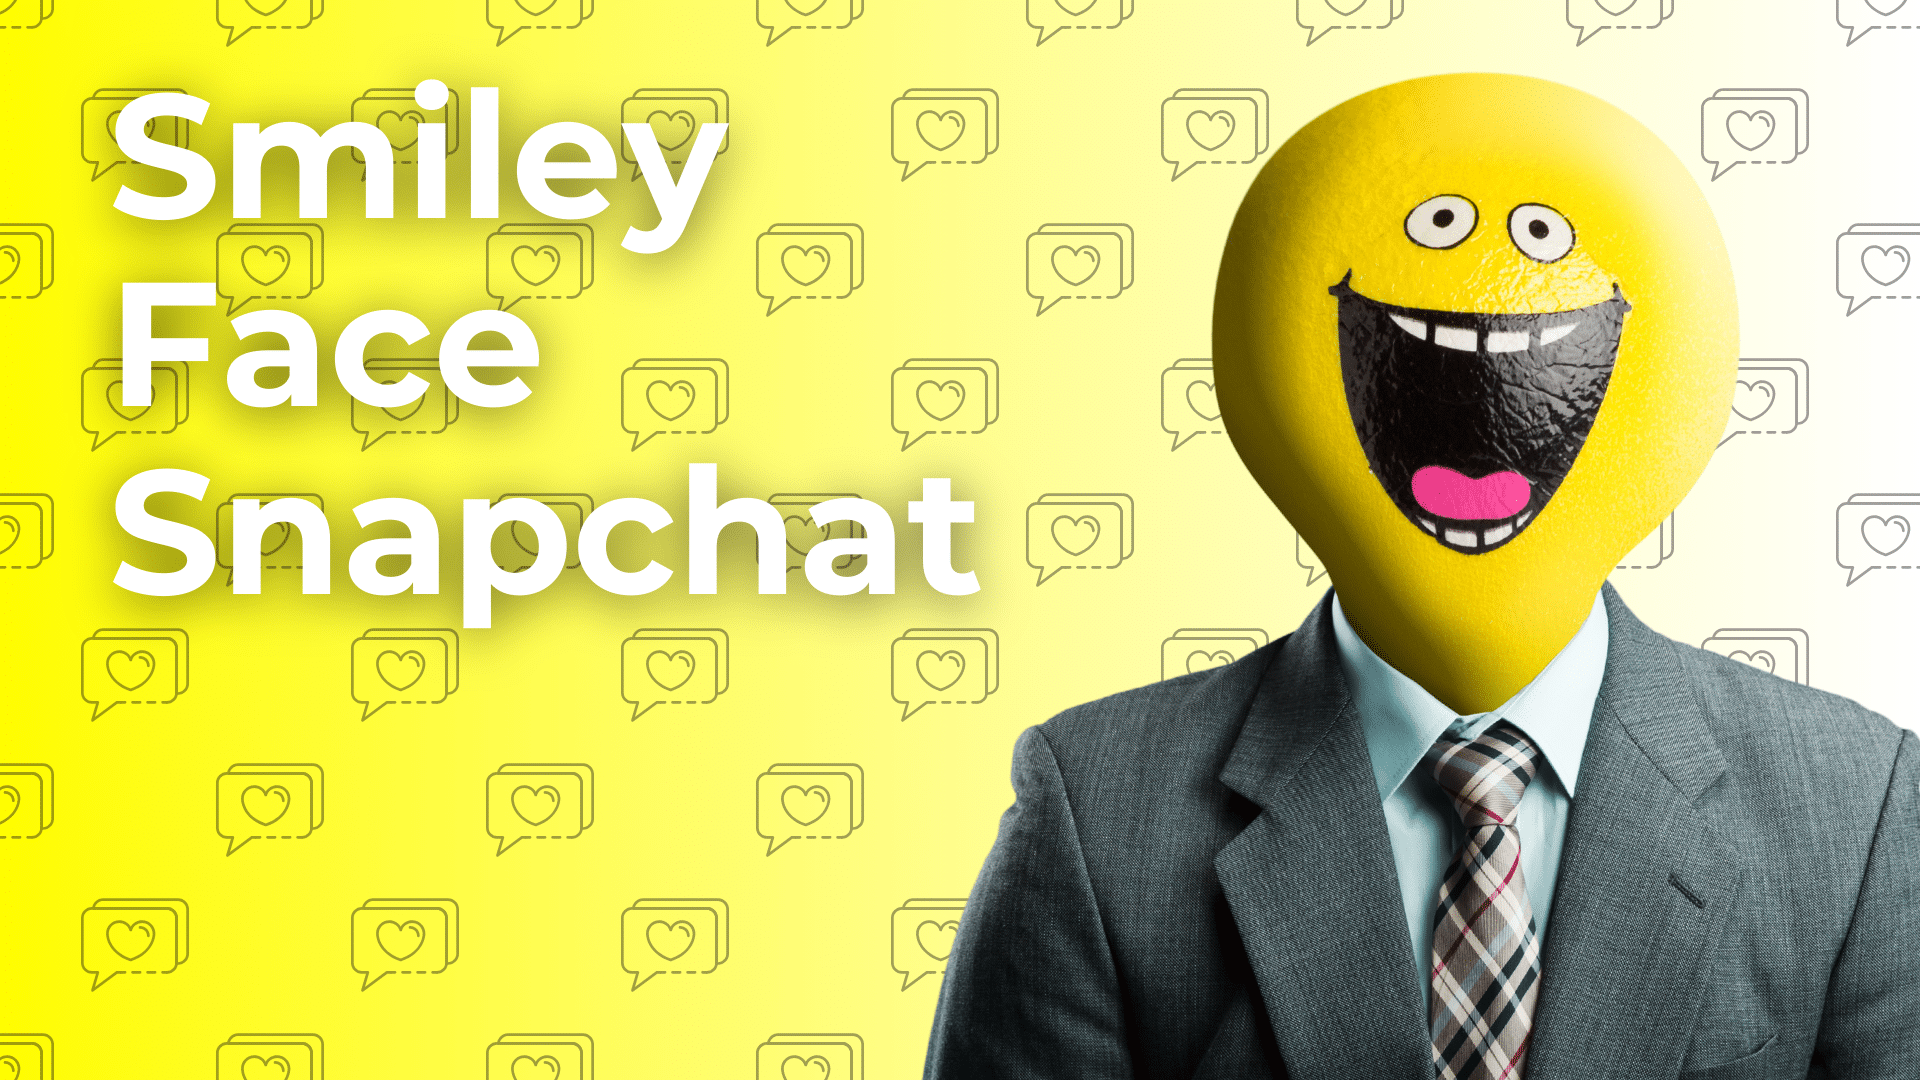 The Complete Guide to Snapchat Emojis